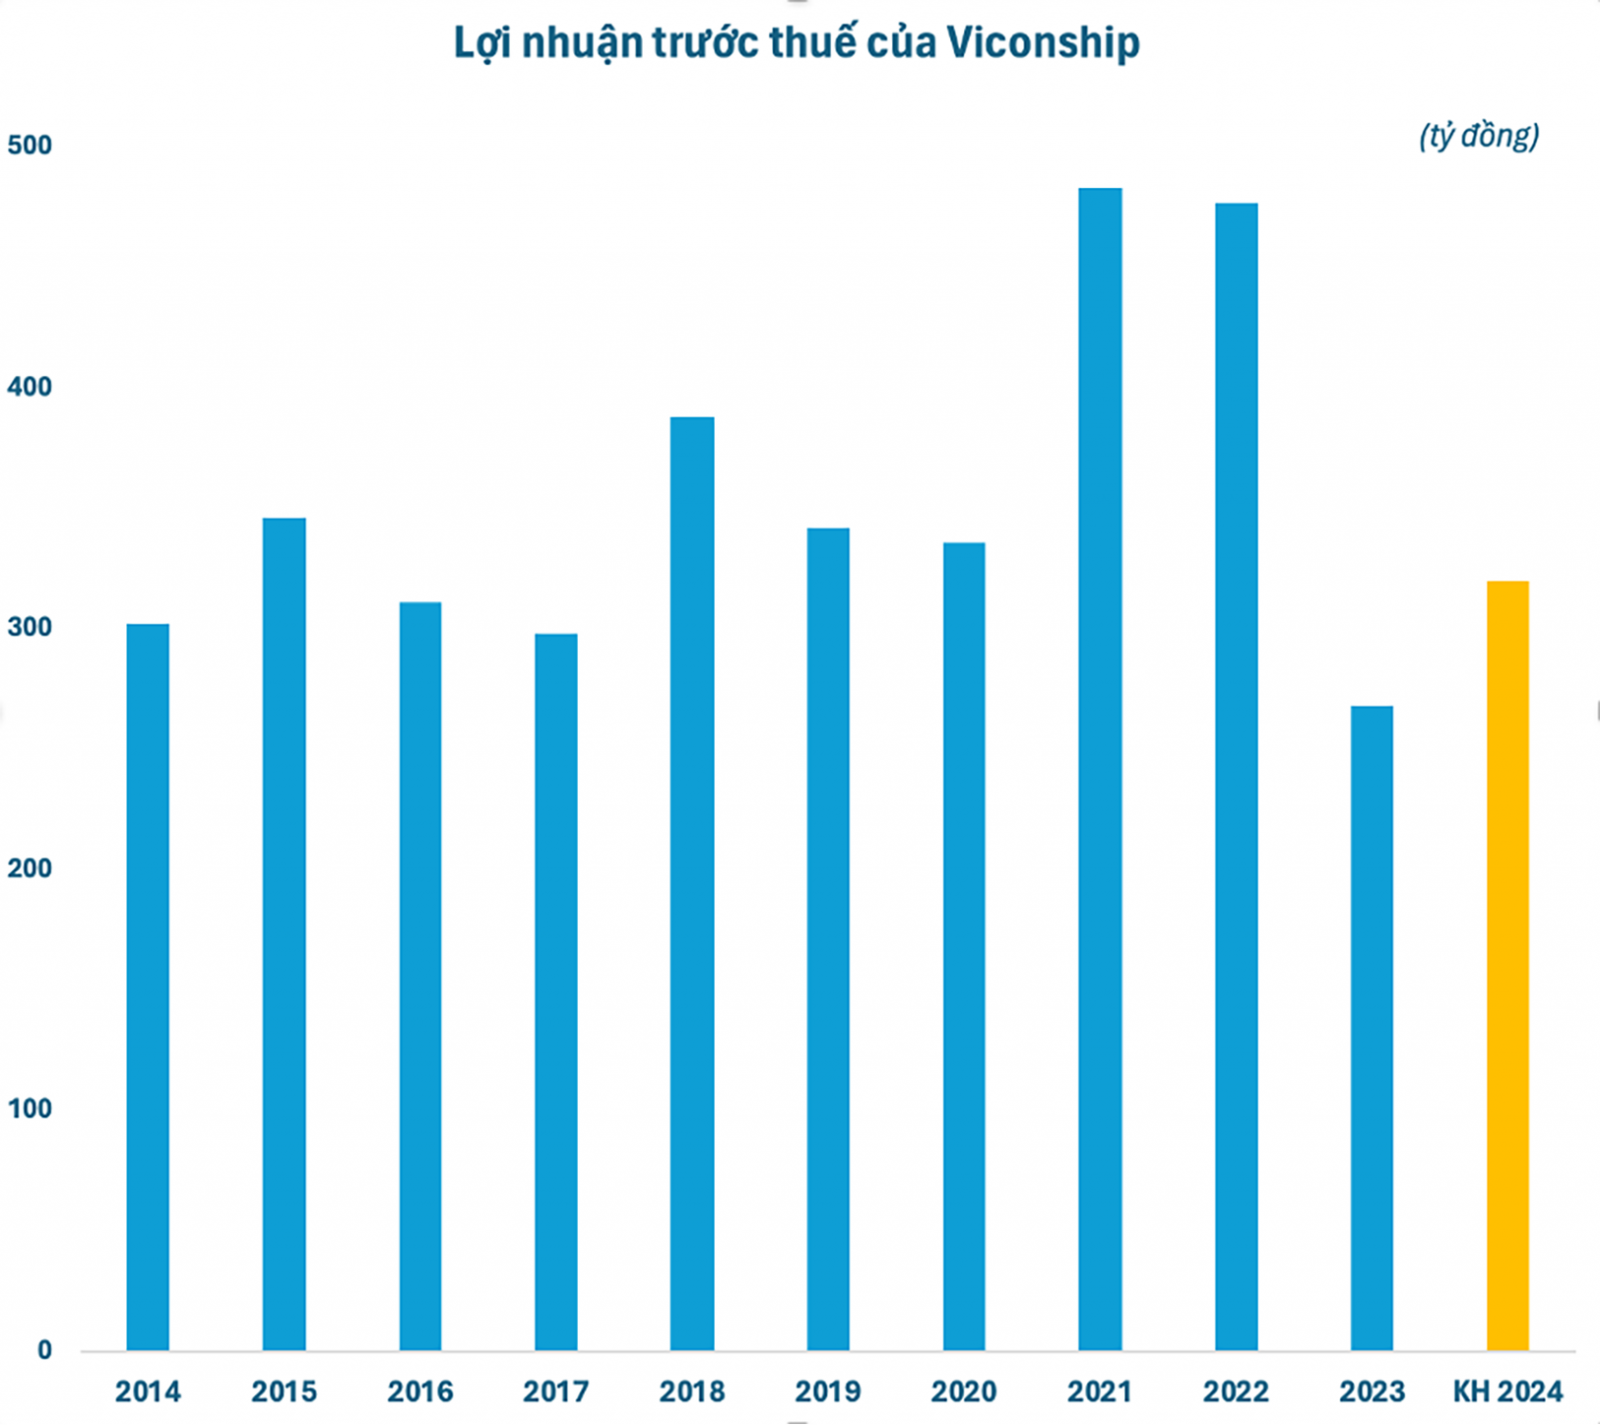 VSC's pre-tax profits over the years